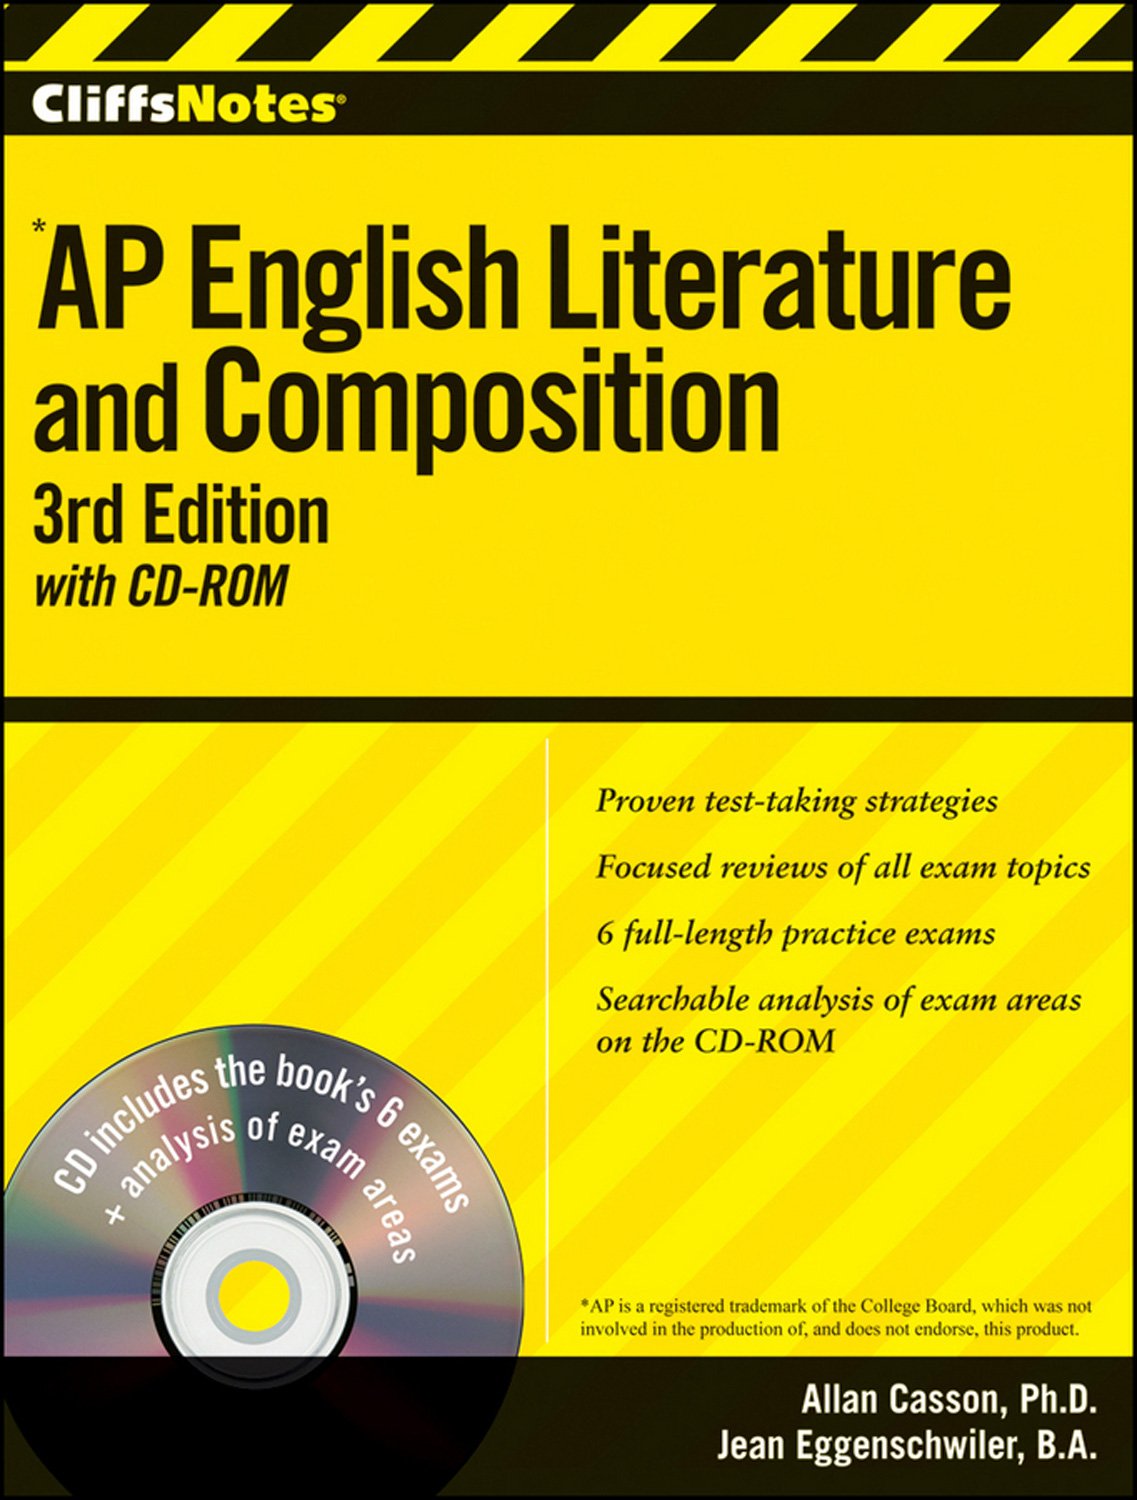 Book Cover CliffsNotes AP English Literature and Composition